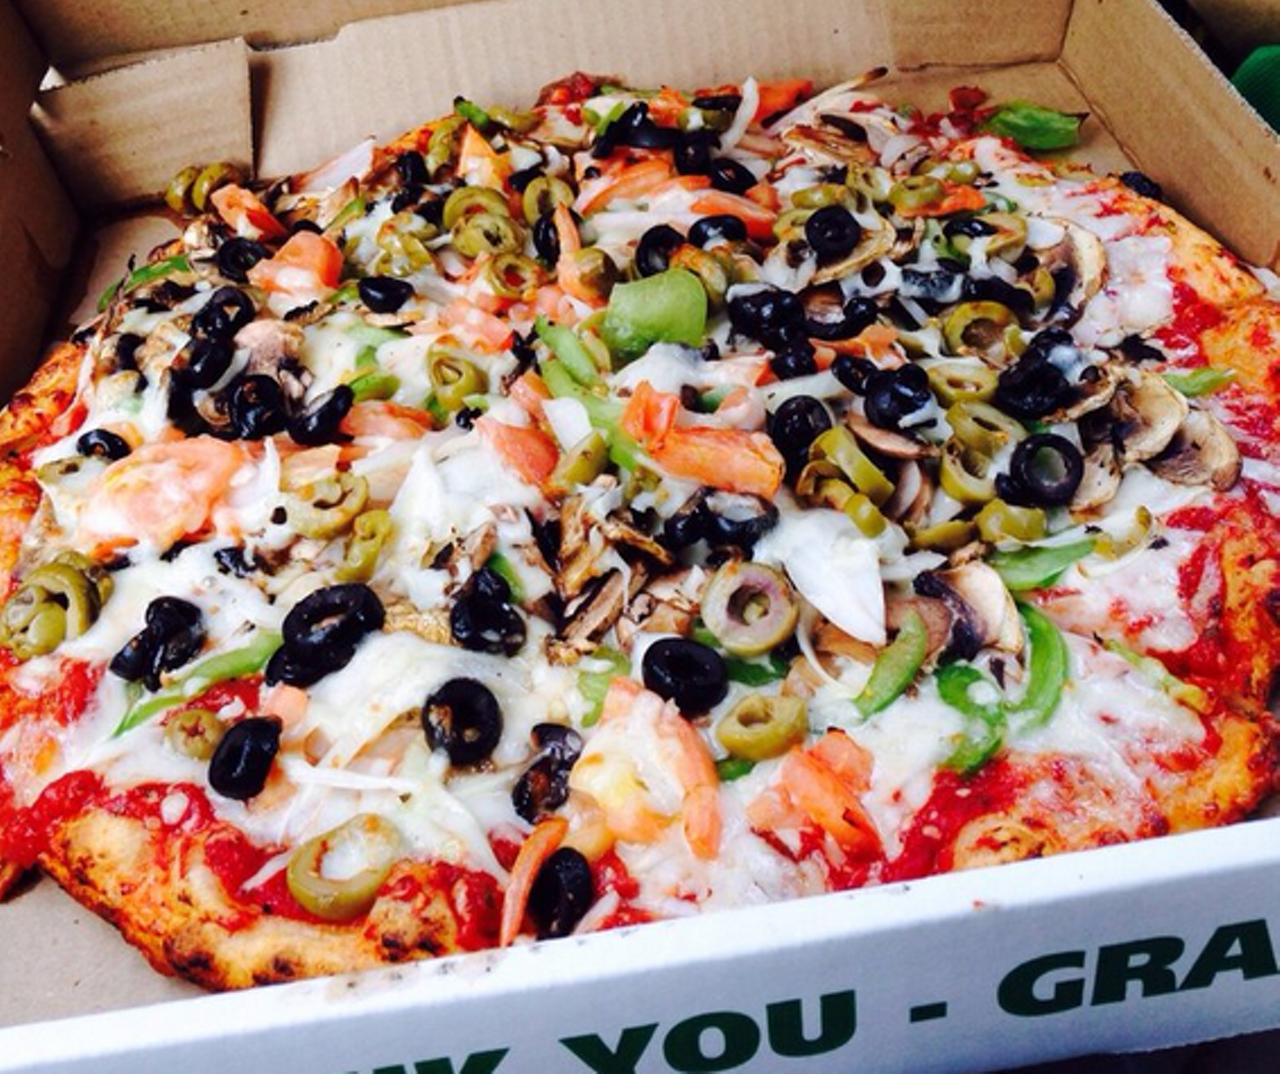 Gregg's Pizza and Bar-B-Q - 17160 Livernois Ave. 
This delivery and take-out spot is known for the fresh ingredients it uses to top its pizza.
(Photo via Yelp, ANDREA F.)